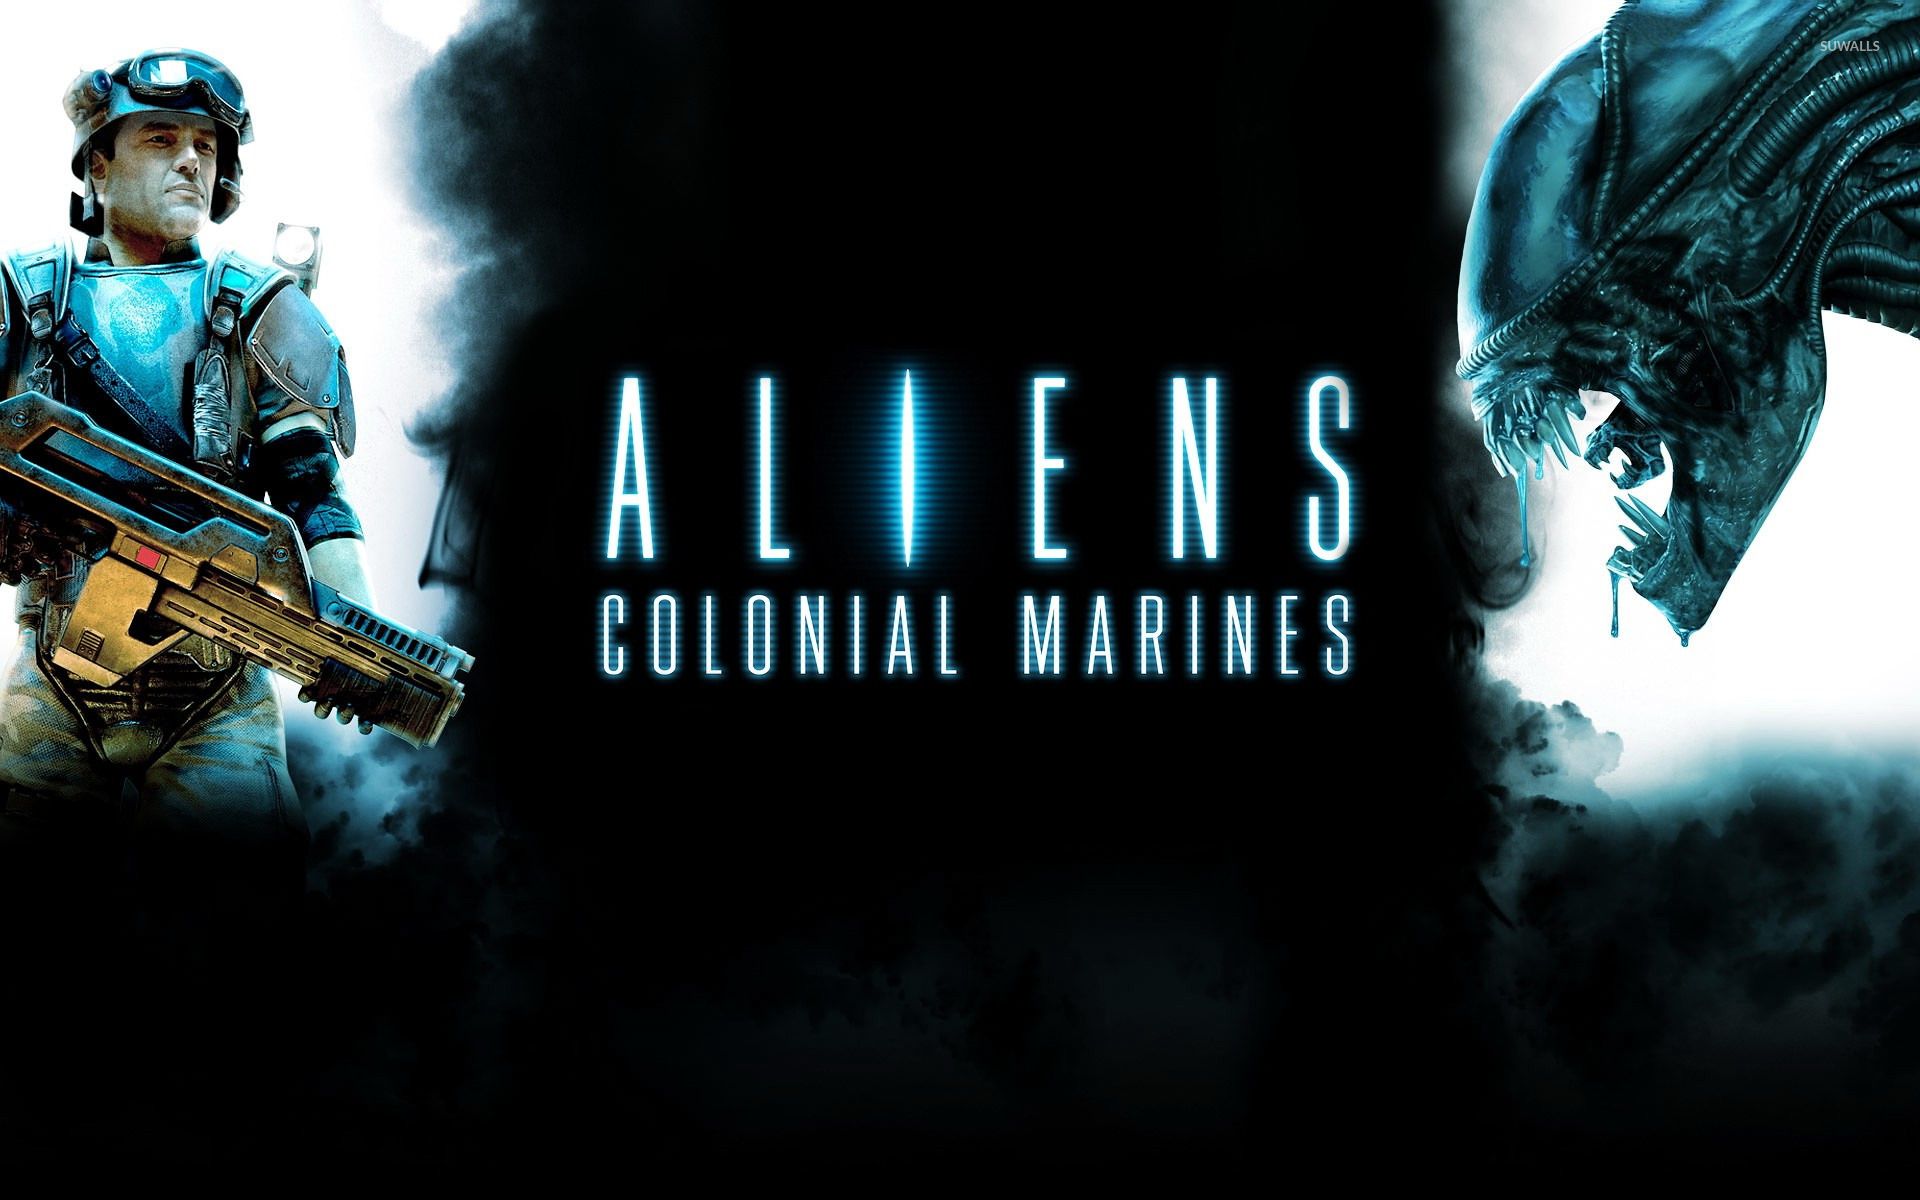 Free download Aliens Colonial Marines wallpaper Game wallpaper 16330 [1366x768] for your Desktop, Mobile & Tablet. Explore Aliens Colonial Marines Wallpaper. Marines Wallpaper HD, Alien Queen Wallpaper